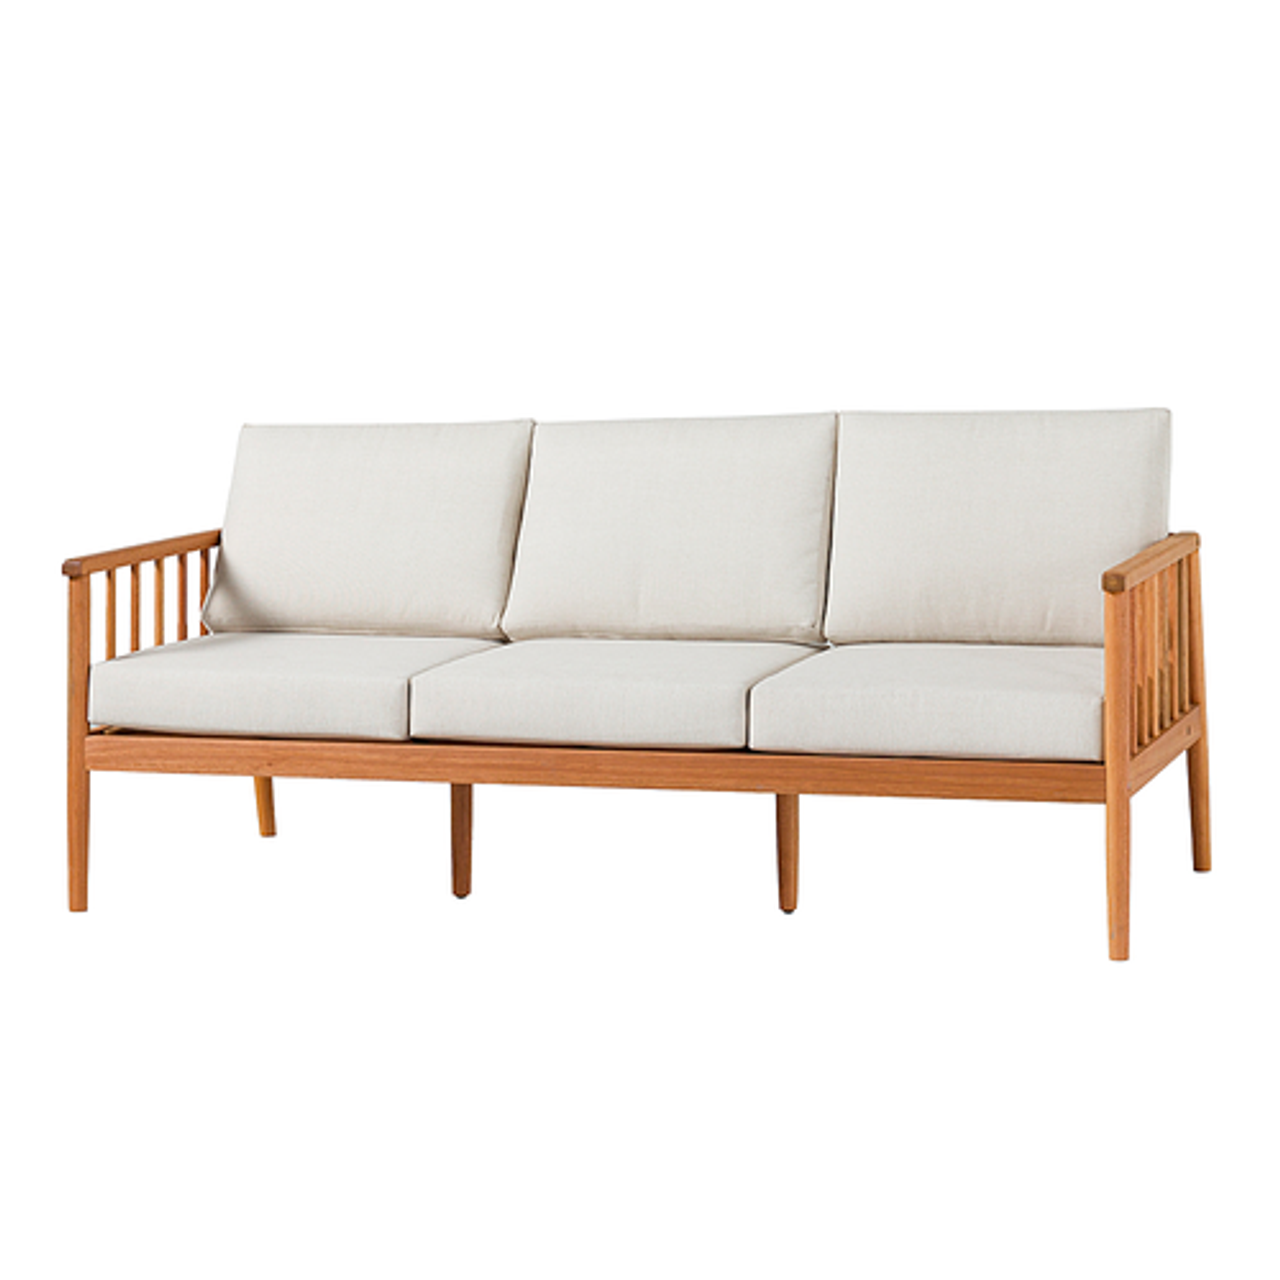 Walker Edison - Modern Solid Wood Spindle-Style Outdoor Triple Loveseat - Natural